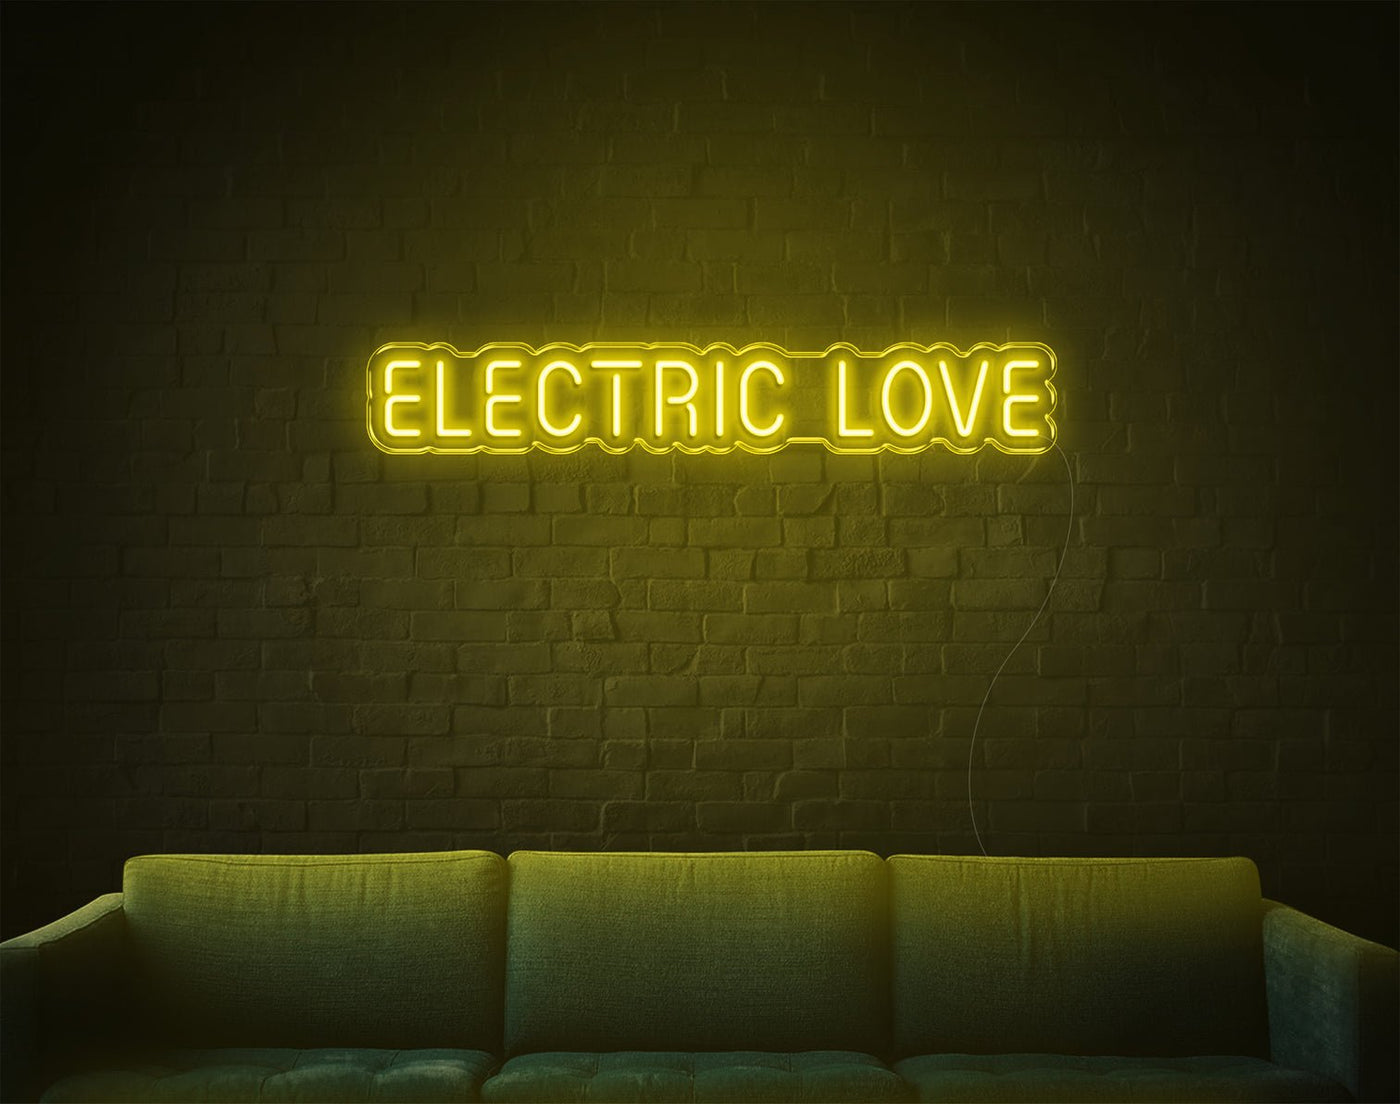 Electric Love LED Neon Sign - 5inch x 31inchHot Pink